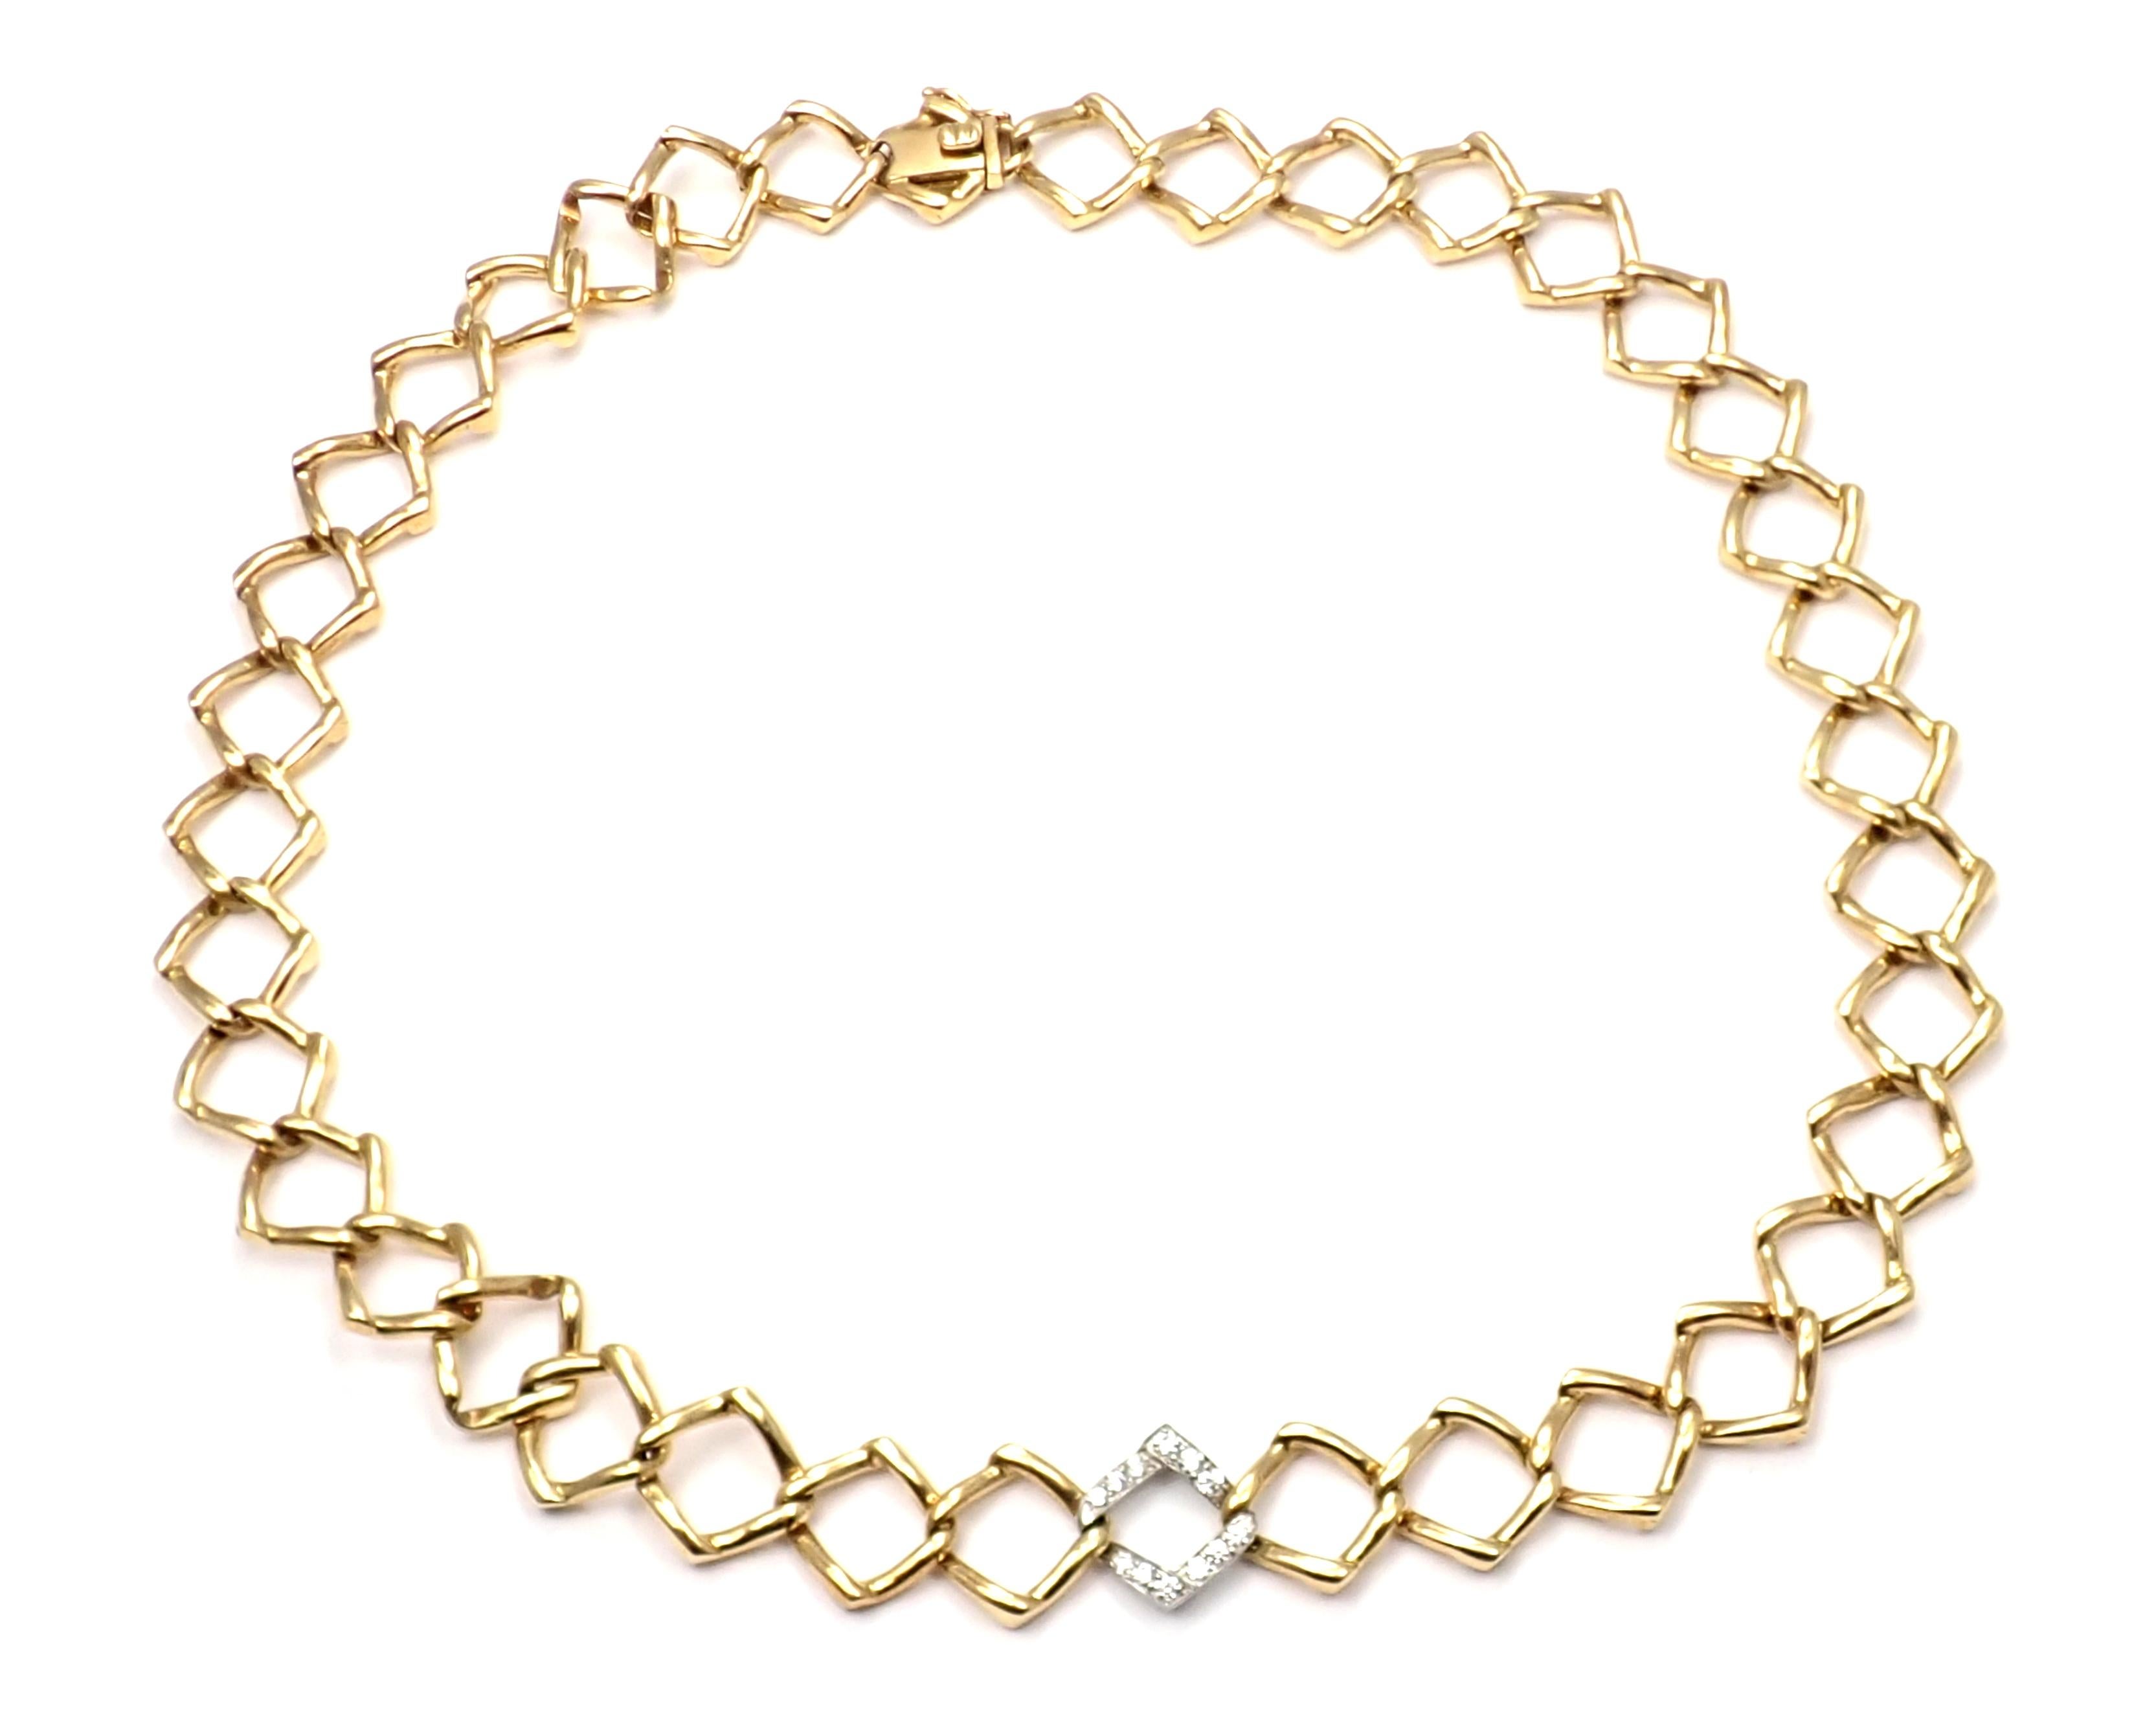 Platinum & 18k Yellow Gold Diamond Necklace by Paloma Picasso for Tiffany & Co. 
With Round brilliant cut diamonds VS1 clarity, G color total weight approx. .25ct
Details: 
Length: 15.25